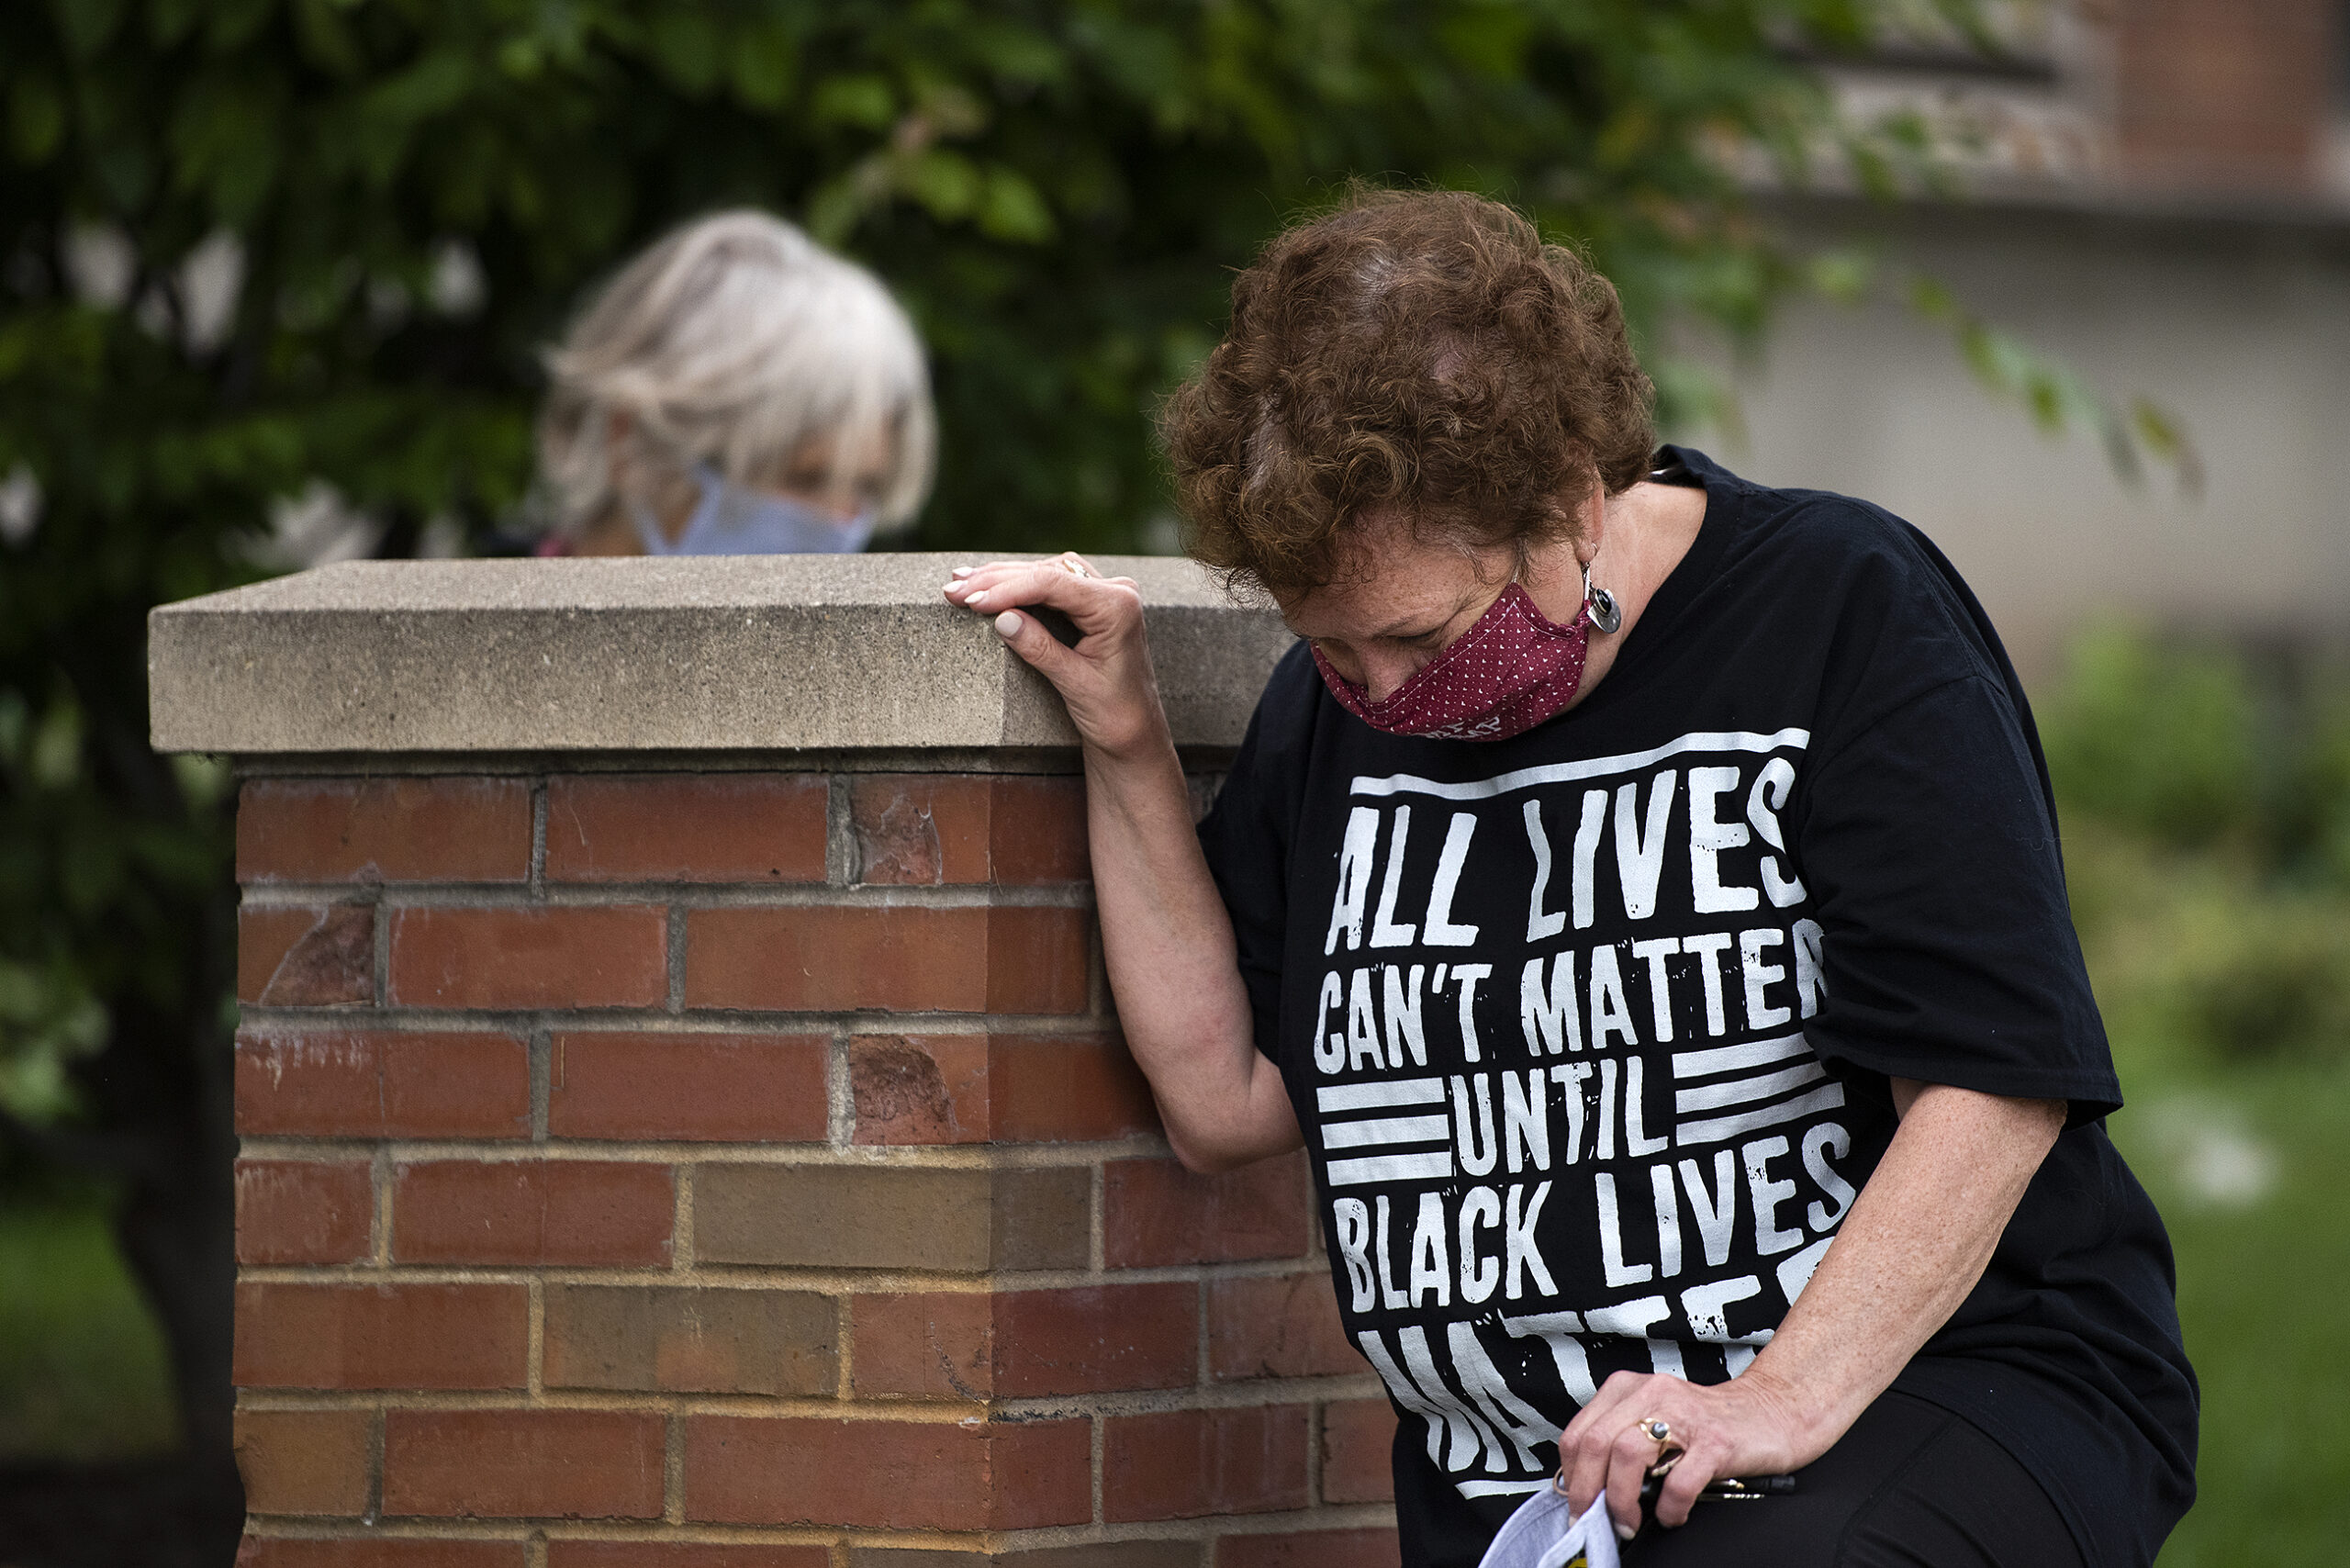 A woman kneels while wearing a shirt that says 